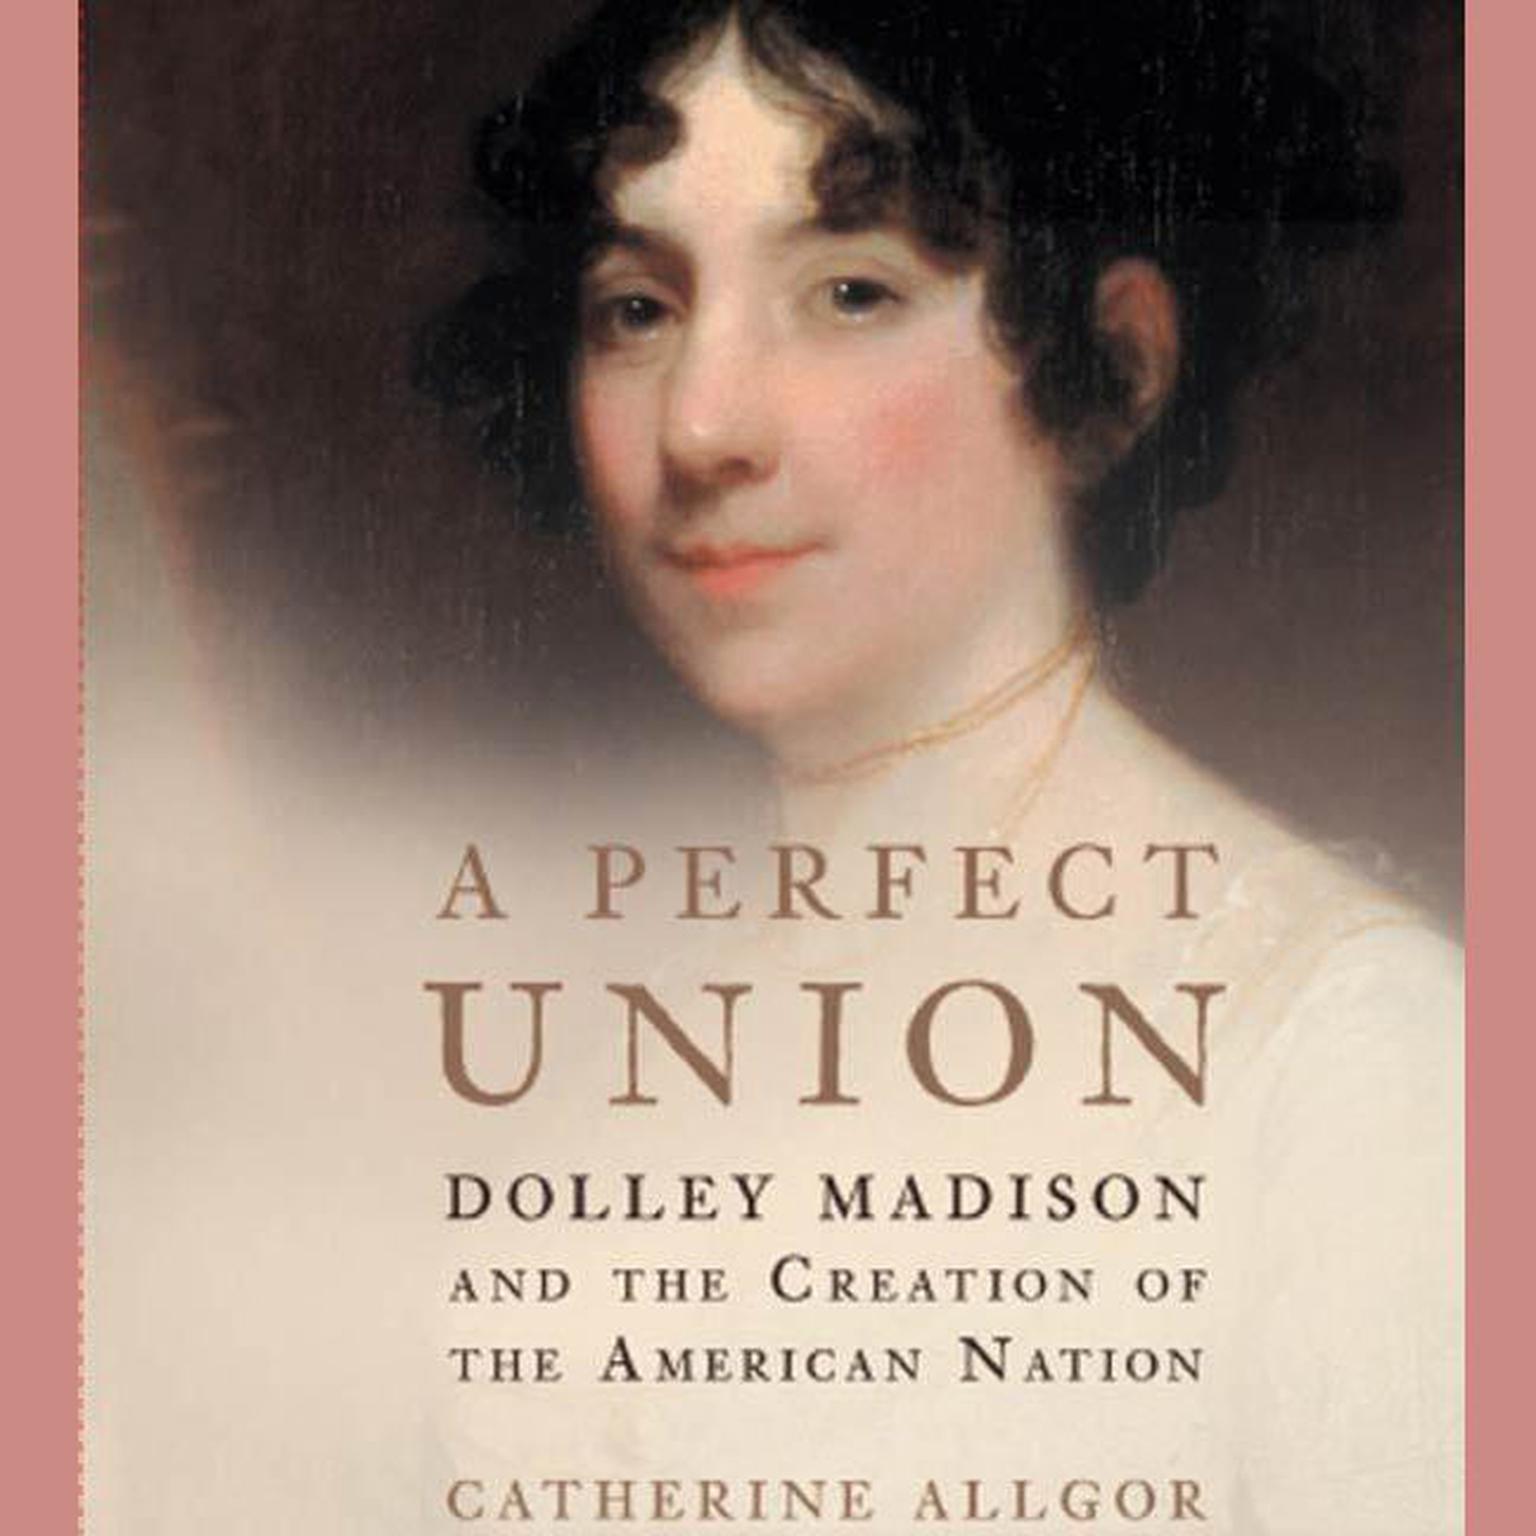 A Perfect Union (Abridged): Dolley Madison and the Creation of the American Nation Audiobook, by Catherine Allgor